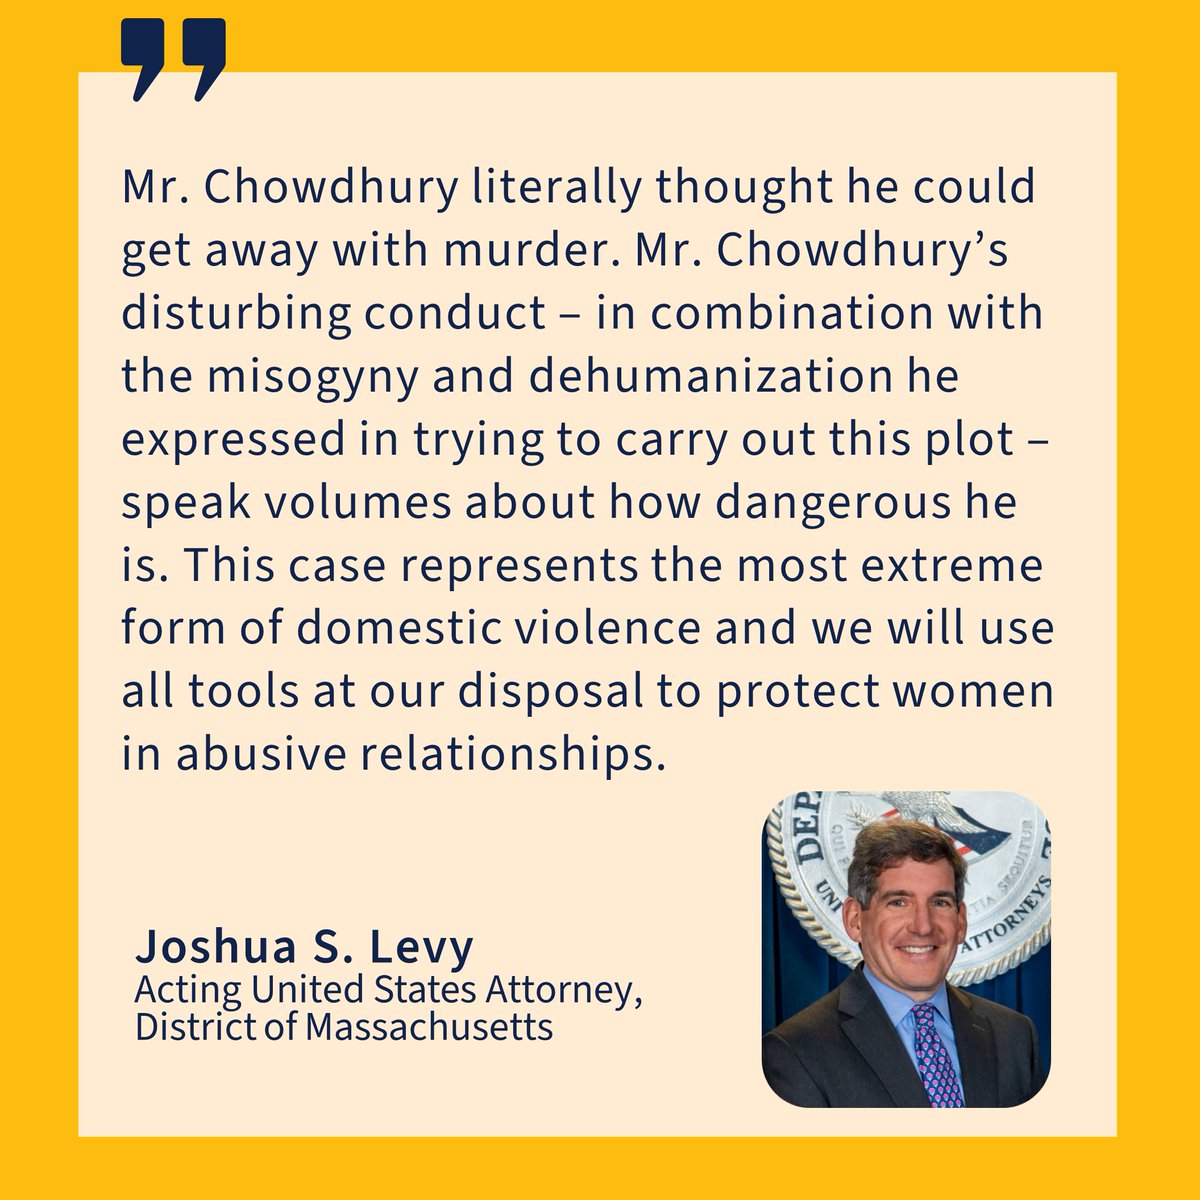 Boston man sentenced to nearly eight years in prison for trying to hire a contract killer to murder his ex-wife and her boyfriend. The defendant agreed to pay $4,000 per murder. 🔗 justice.gov/usao-ma/pr/bos…